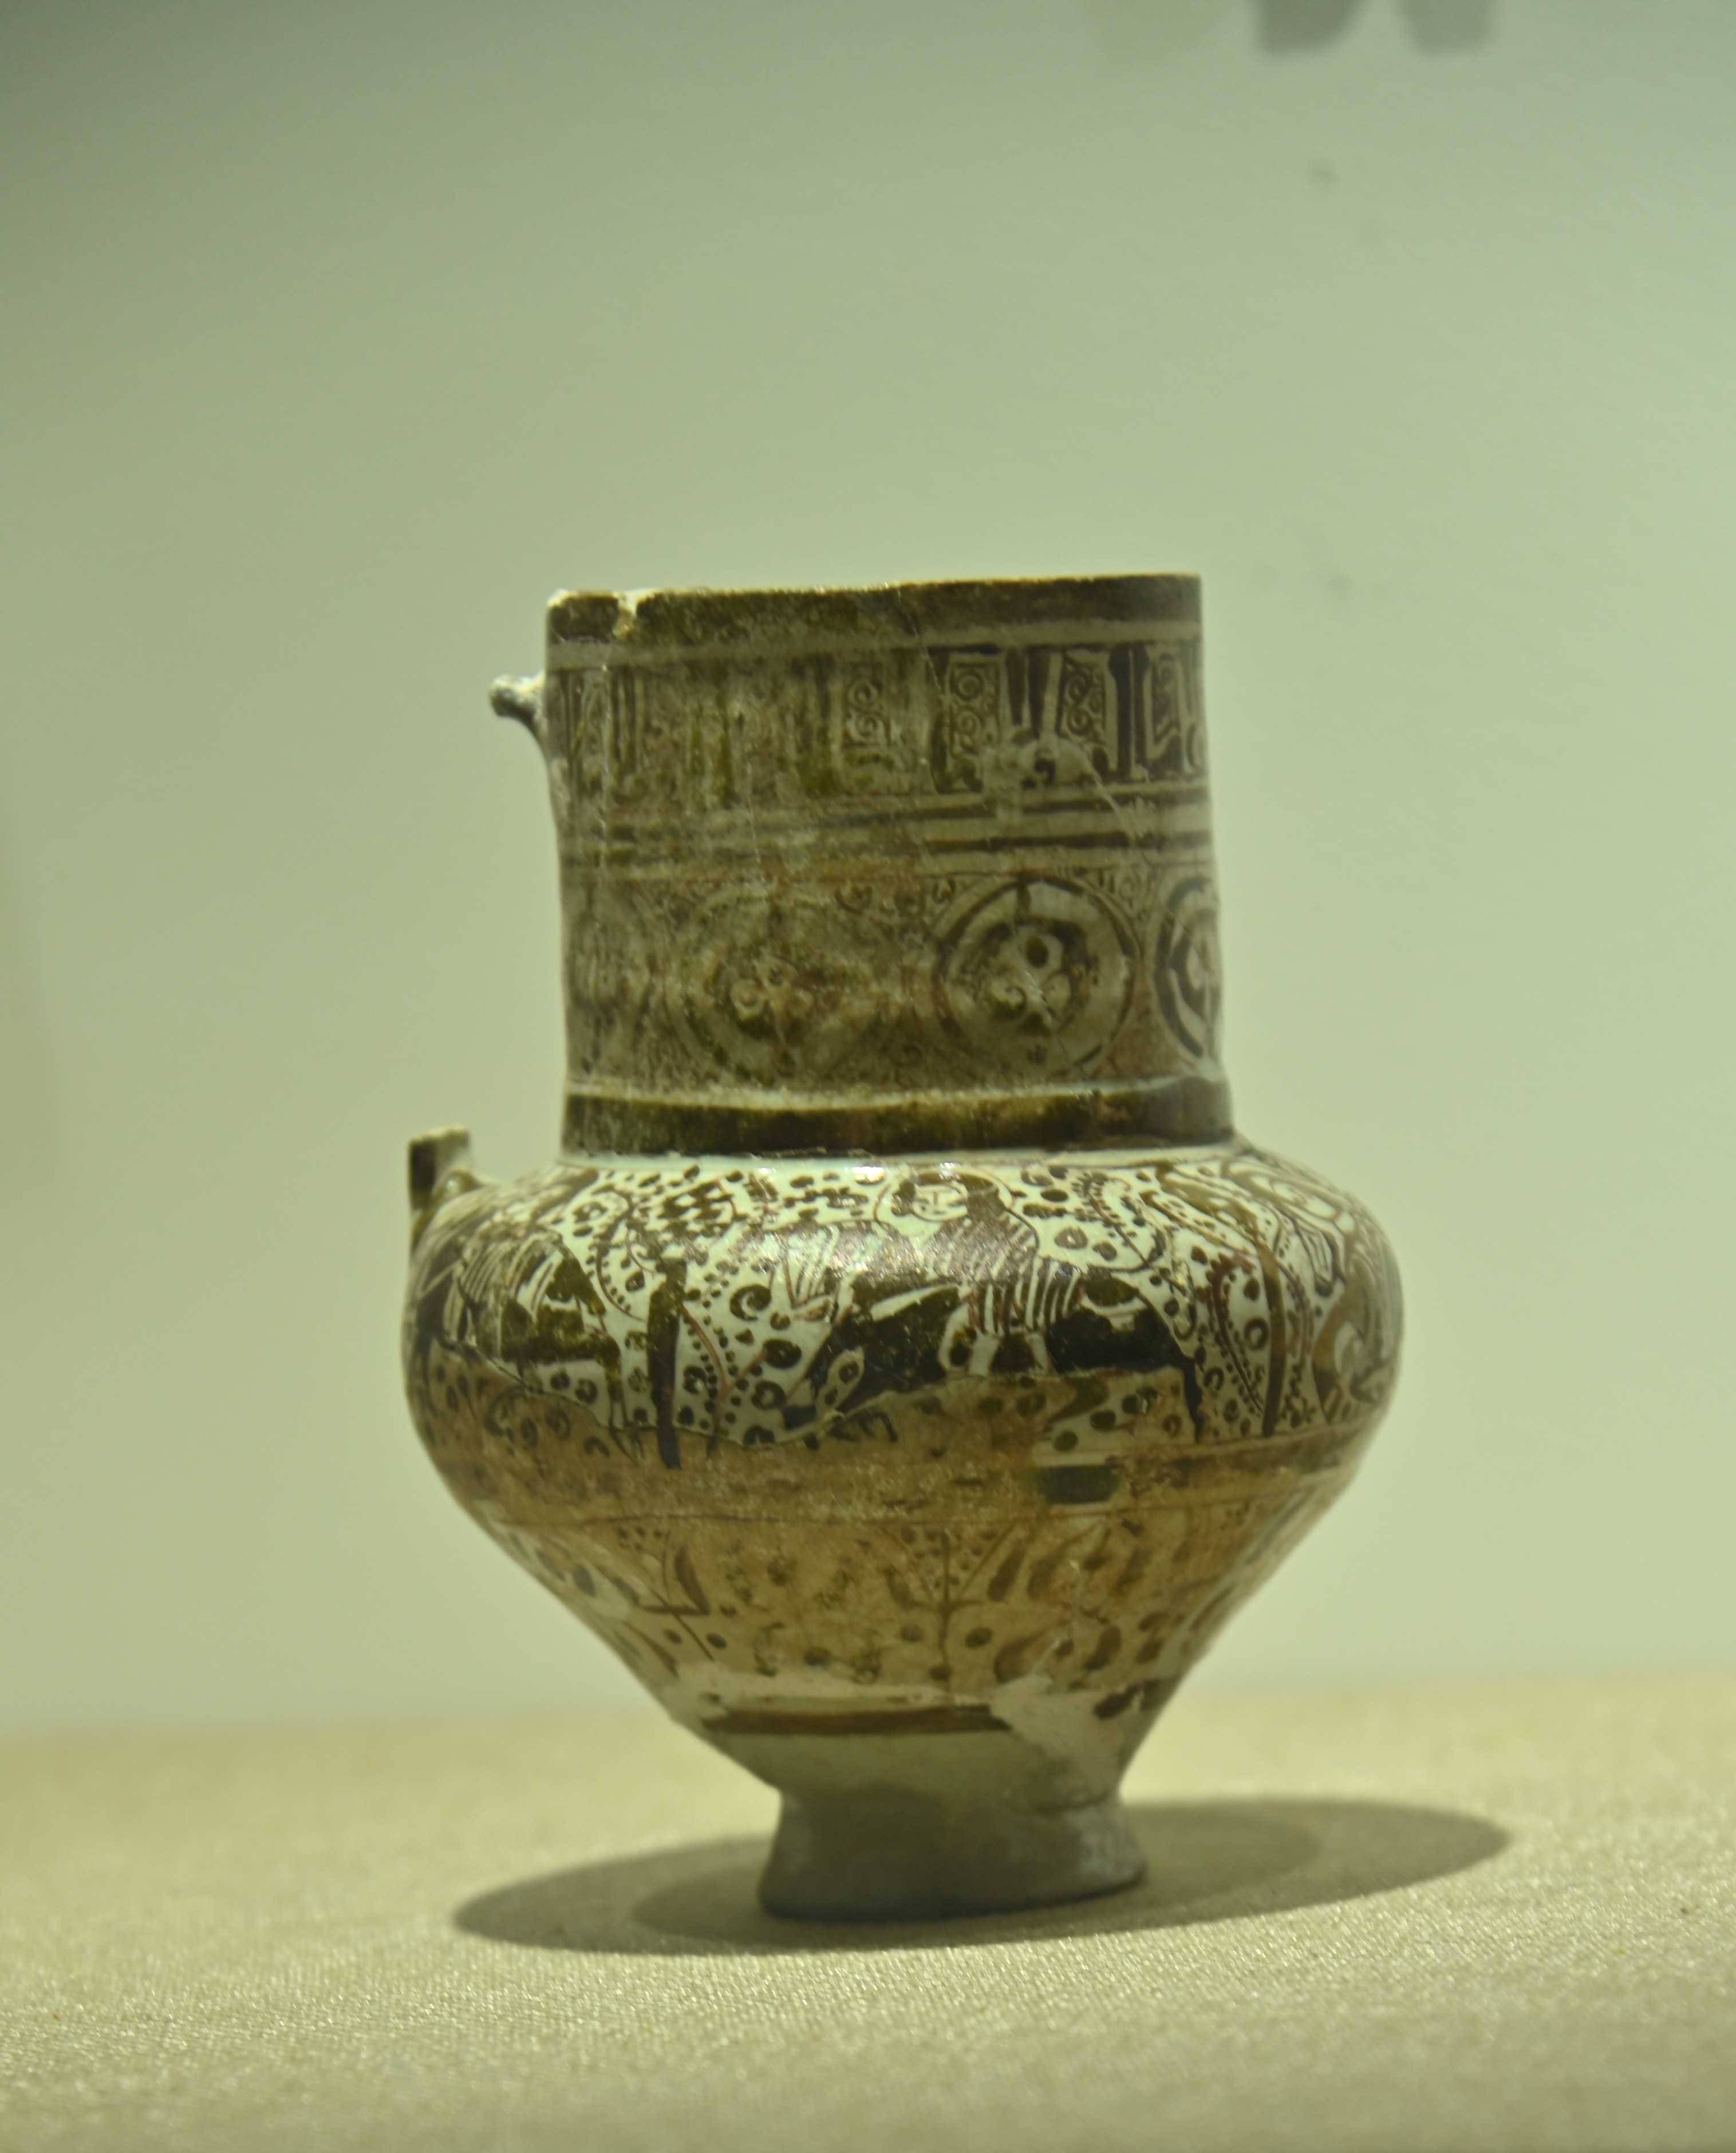 The Vase displayed at the Sir Syed Memorial Museum